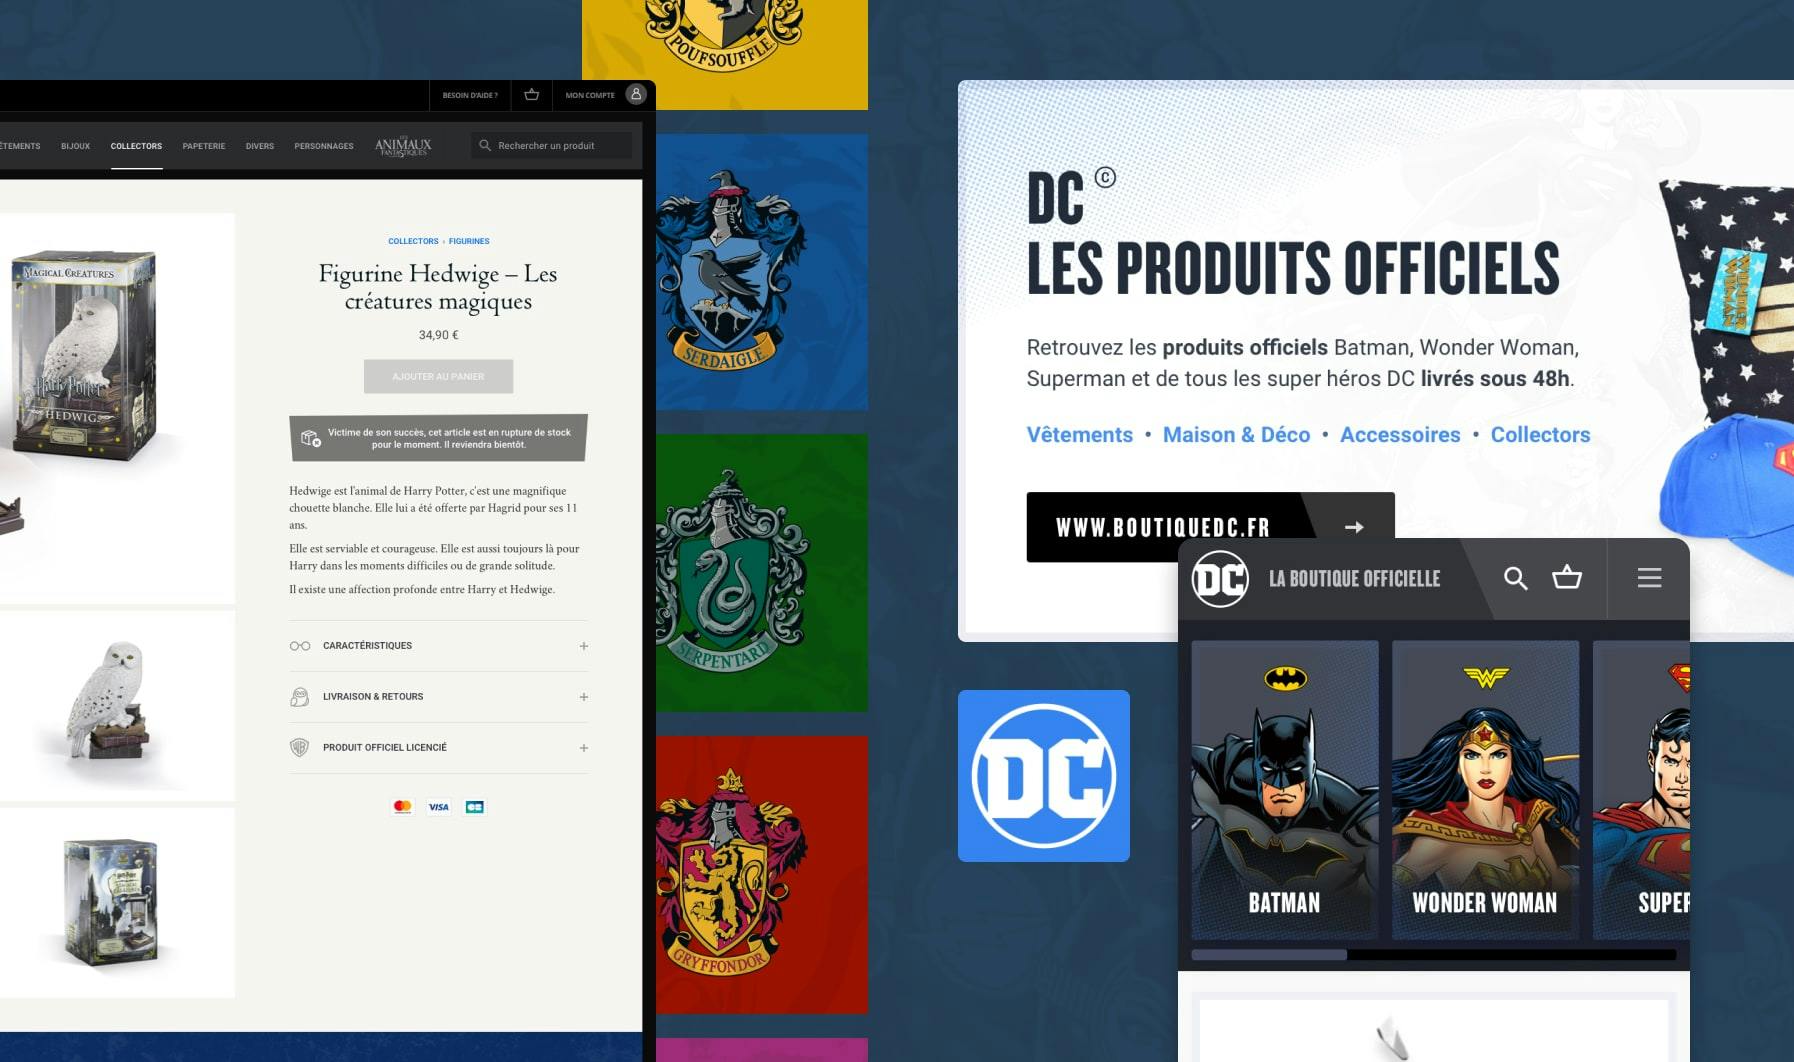 Design of the marketplace for WW & DC products